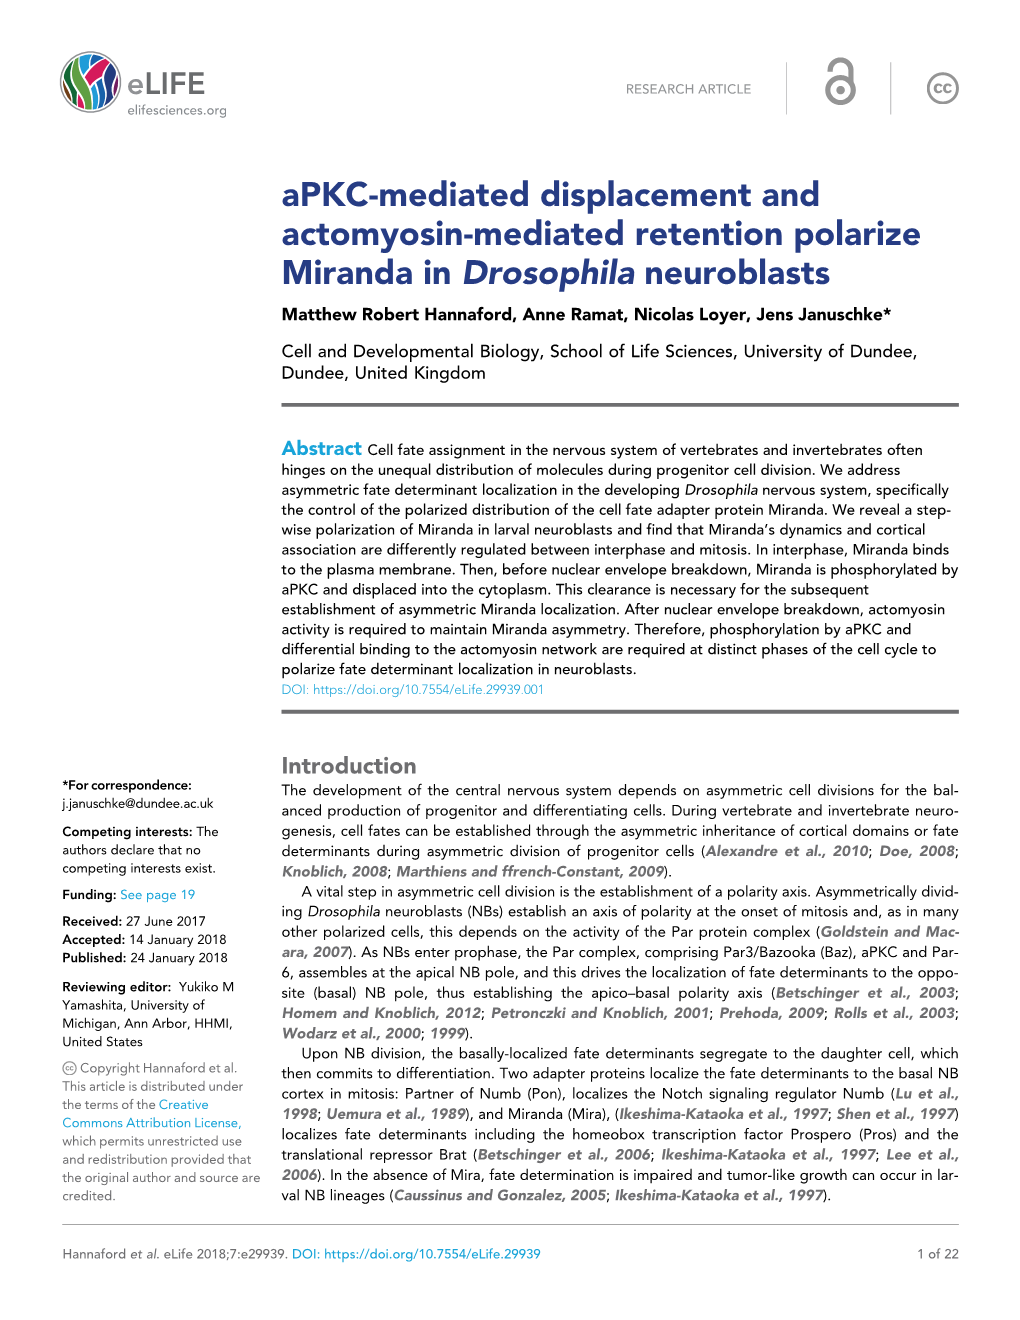 Apkc-Mediated Displacement and Actomyosin-Mediated Retention